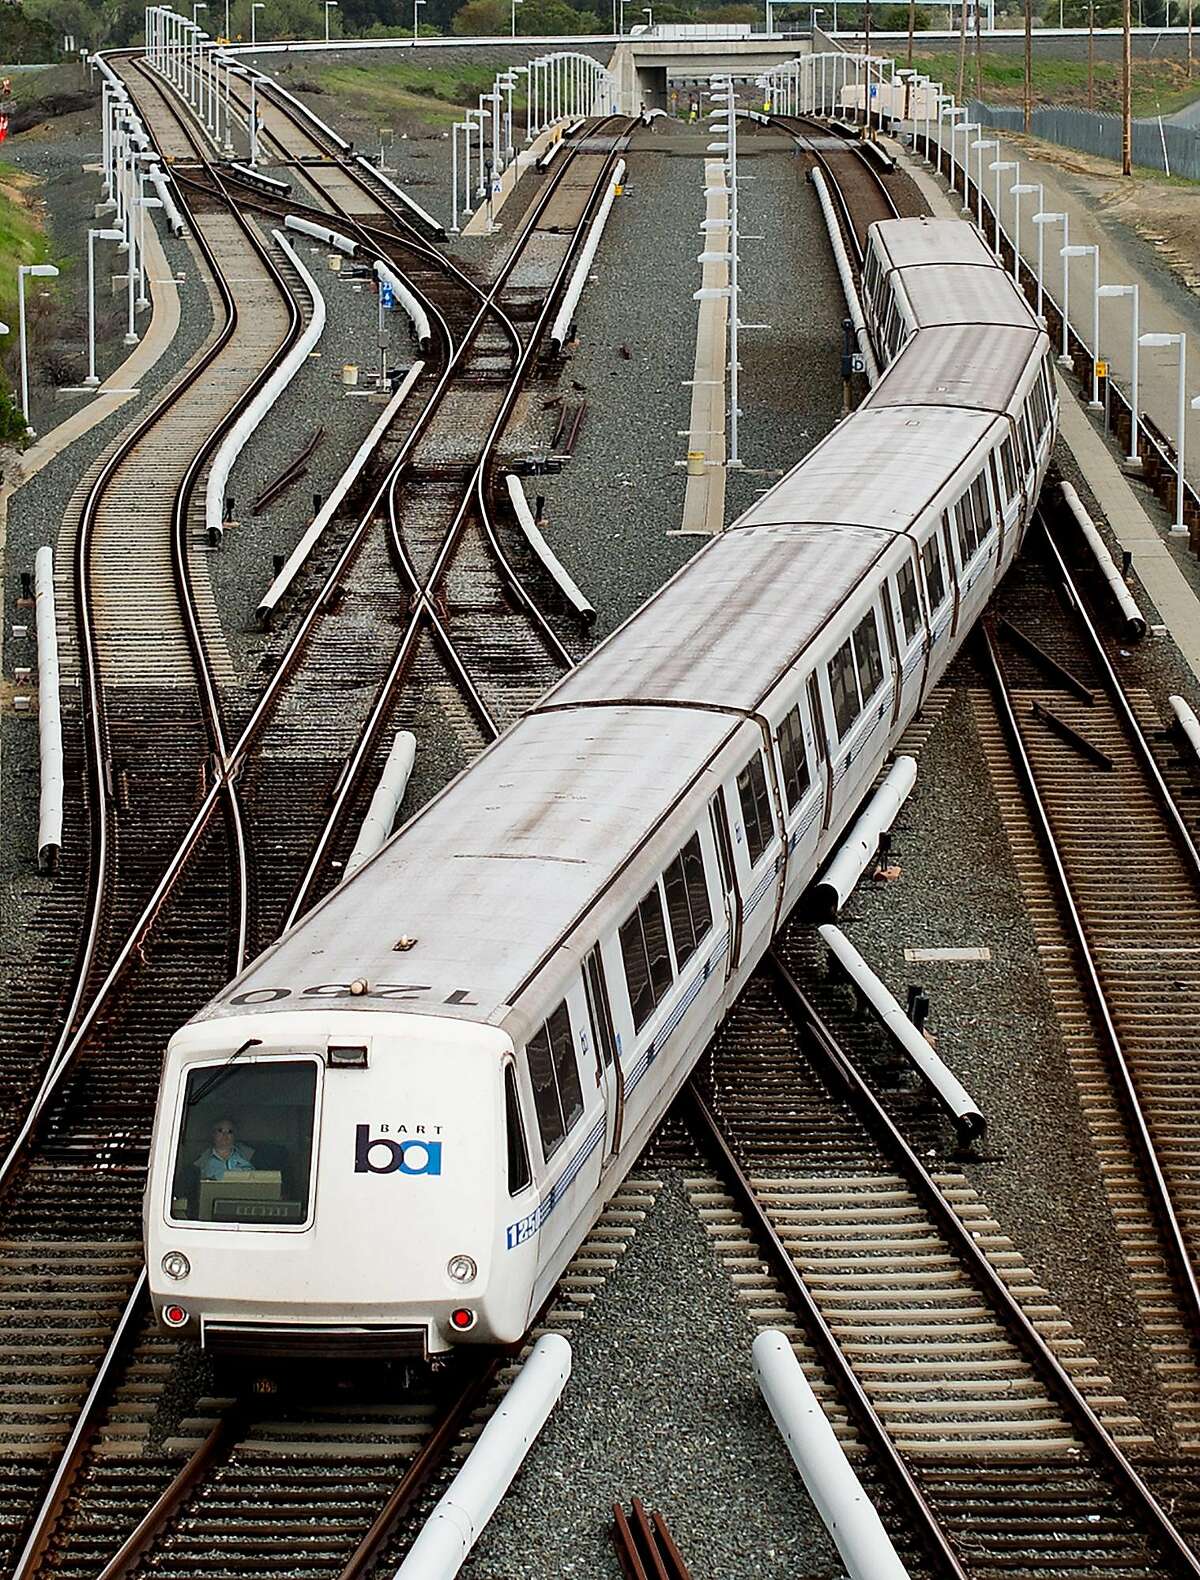 A BART rides over rails just north of the North Concord station on Monday, March 21, 2016, in Concord, Calif. Transit officials said they haven’t pinpointed a “root cause” for a track power-surge problem that halted service between the Pittsburg-Bay Point and North Concord stations.